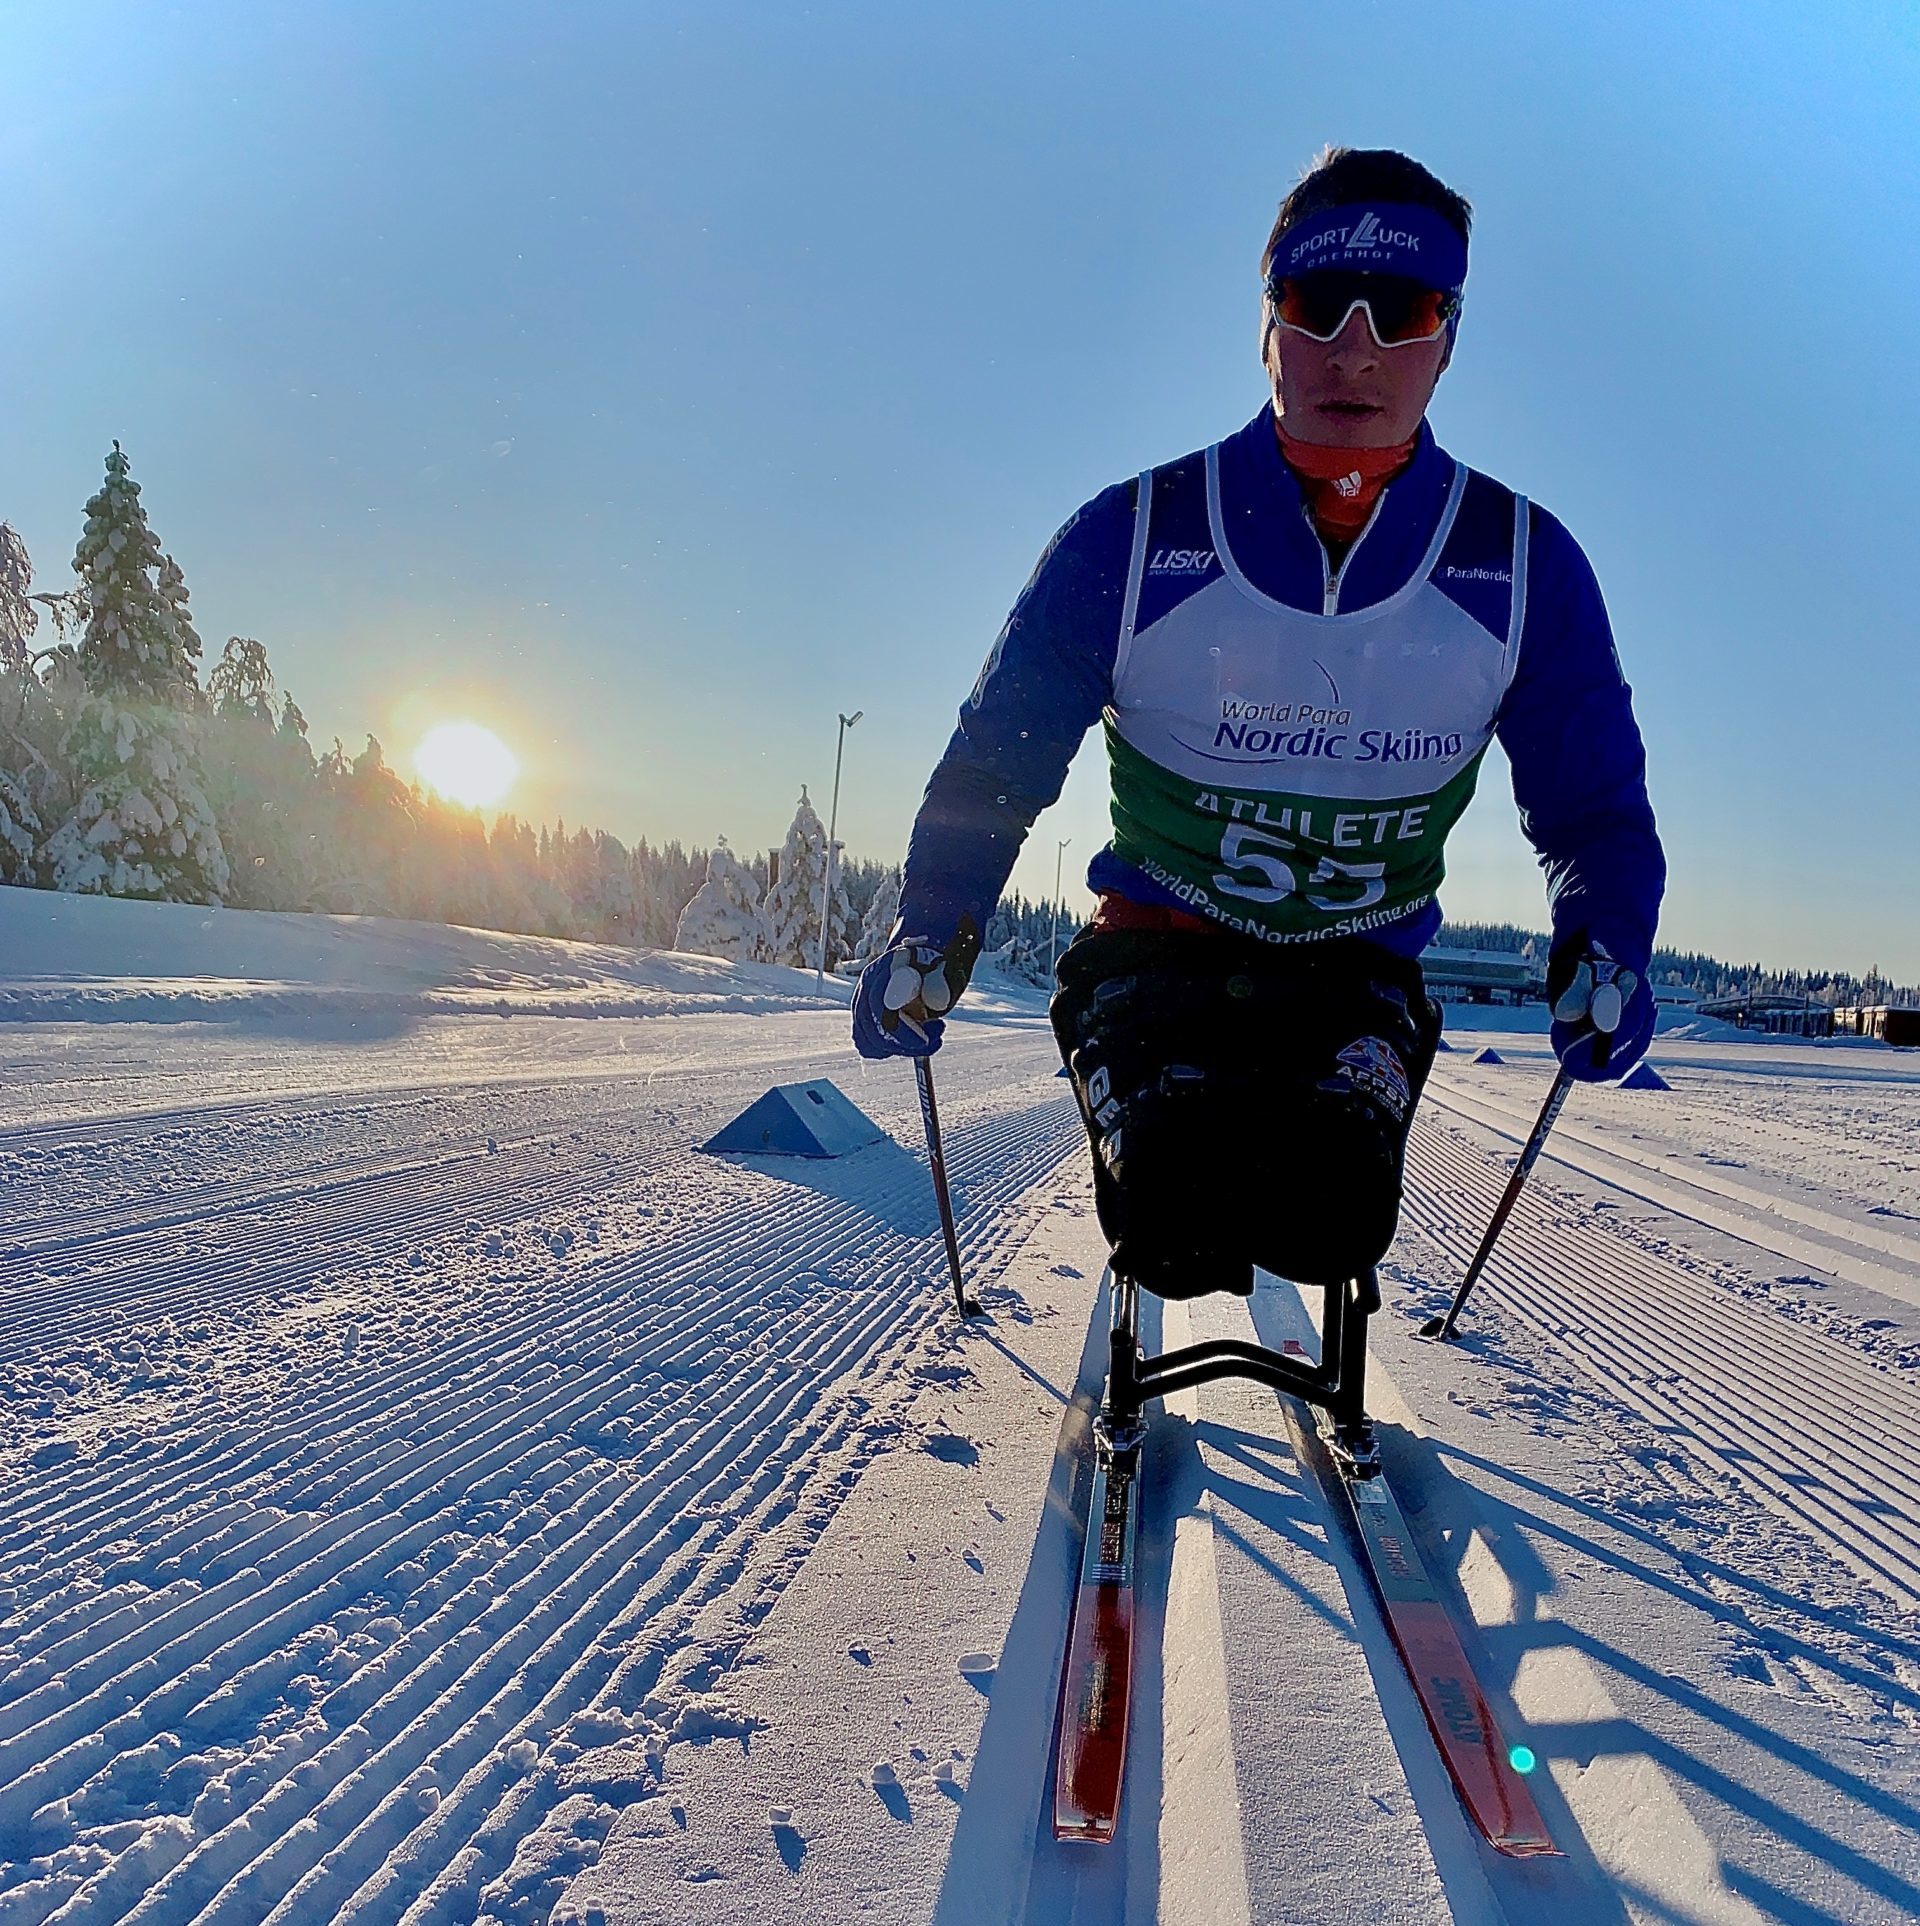 HOW I GOT INTO PARA NORDIC SKIING